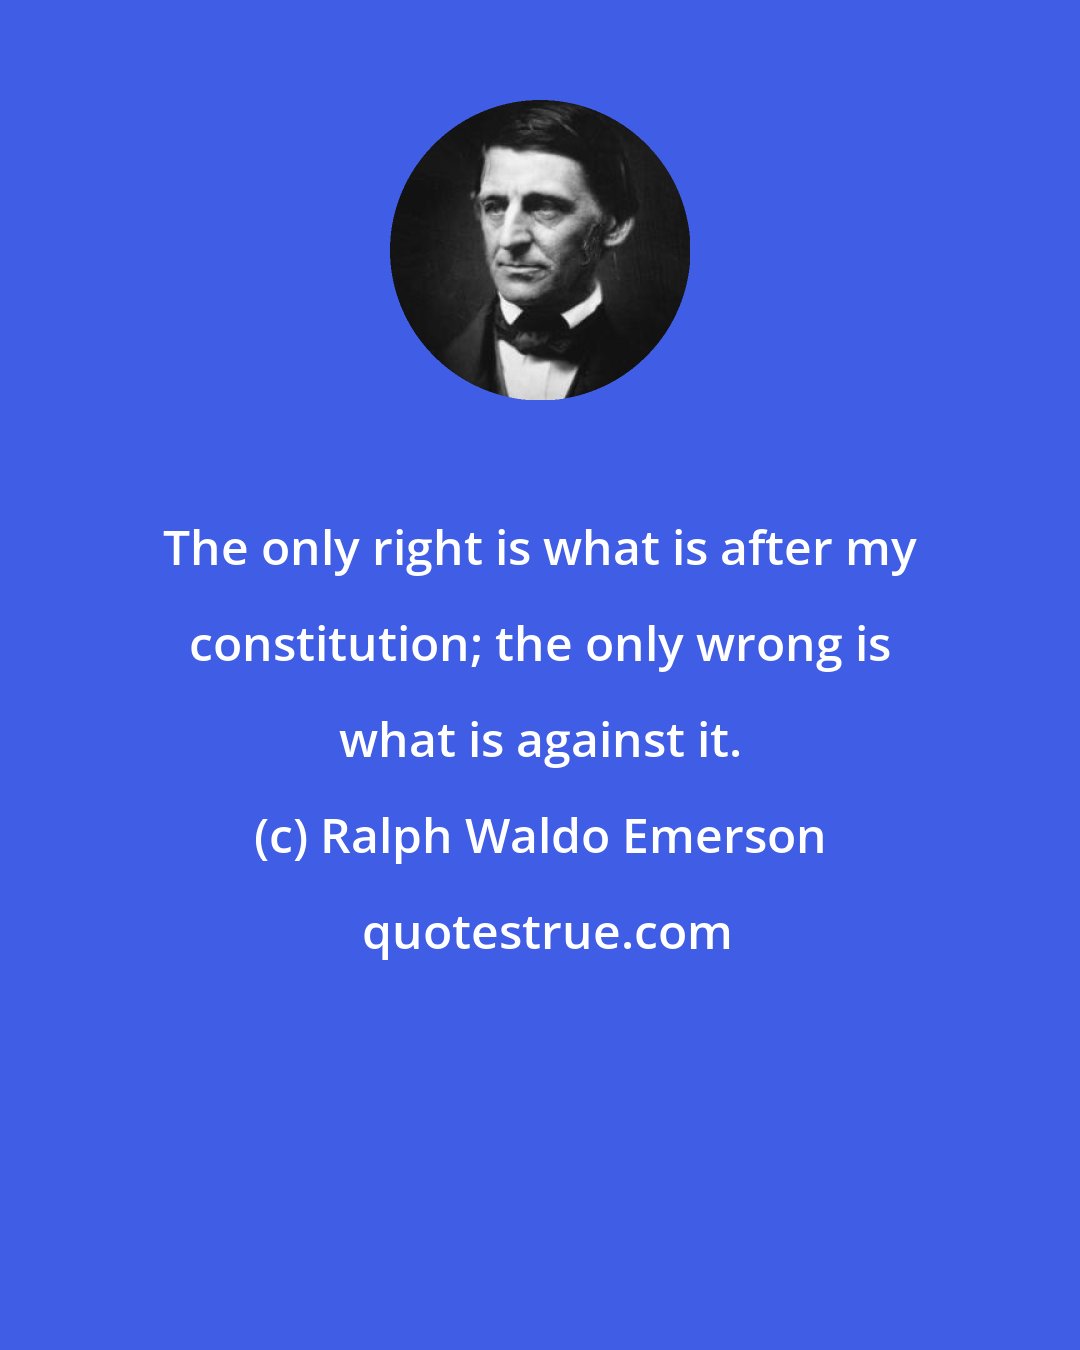 Ralph Waldo Emerson: The only right is what is after my constitution; the only wrong is what is against it.